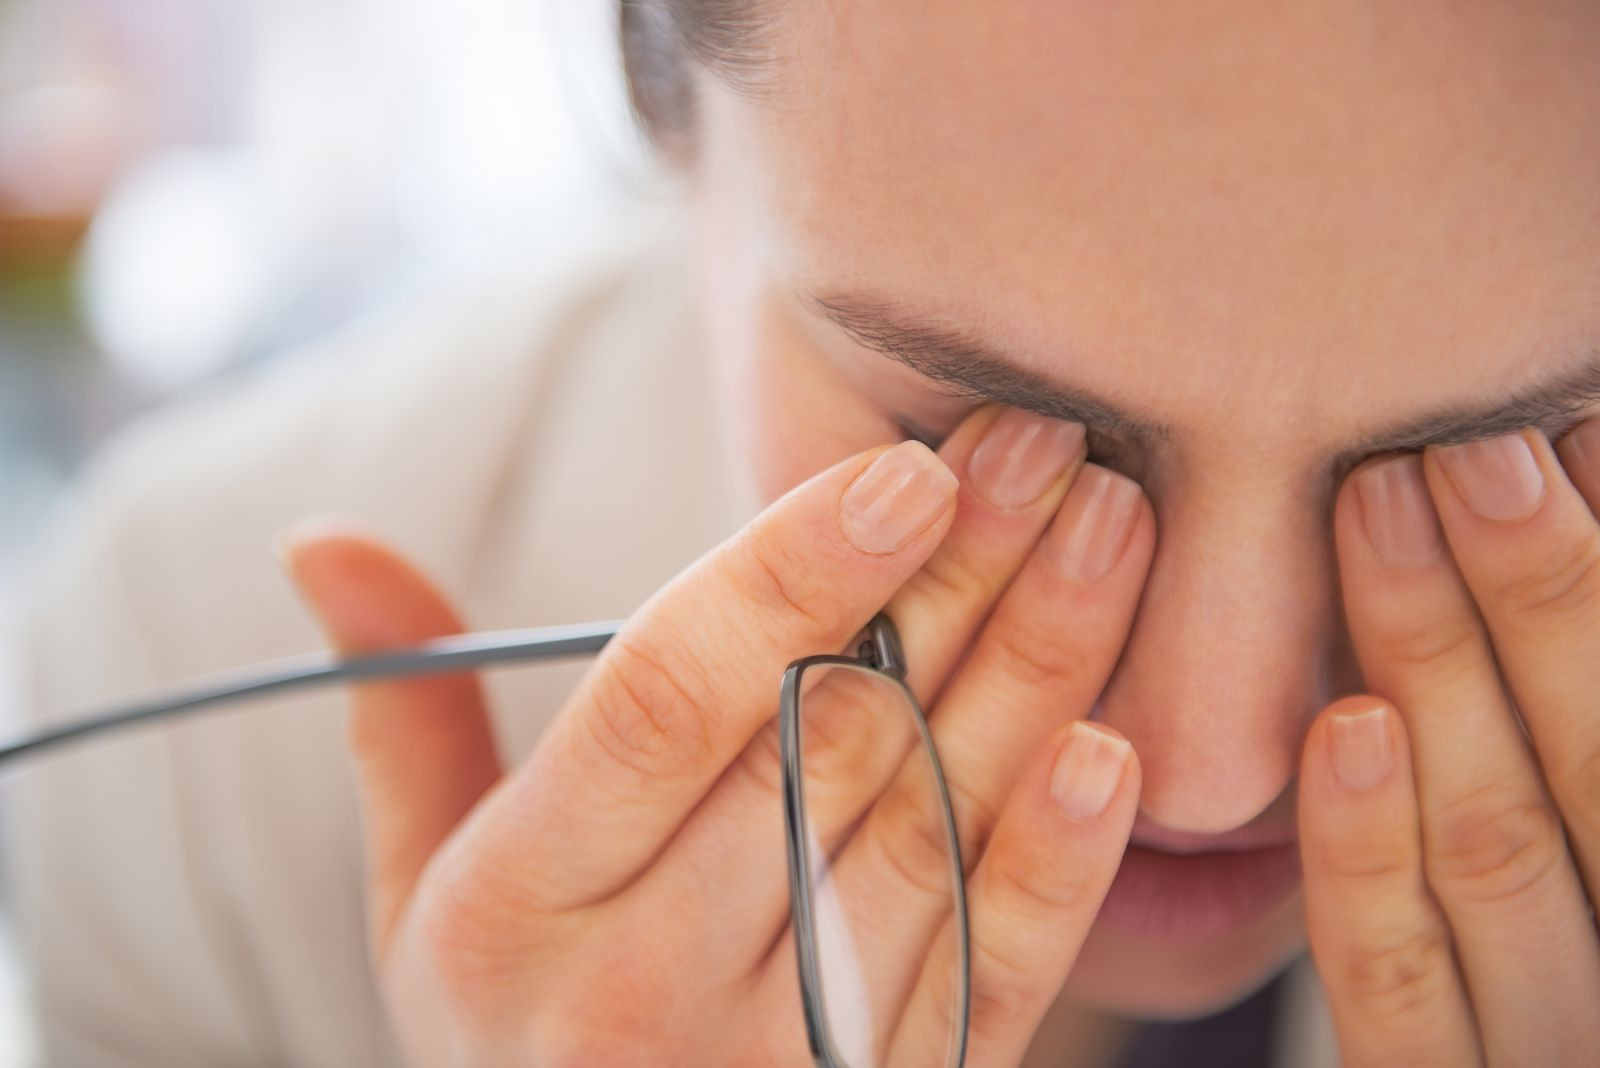 What To Do If Your Eyes Hurt